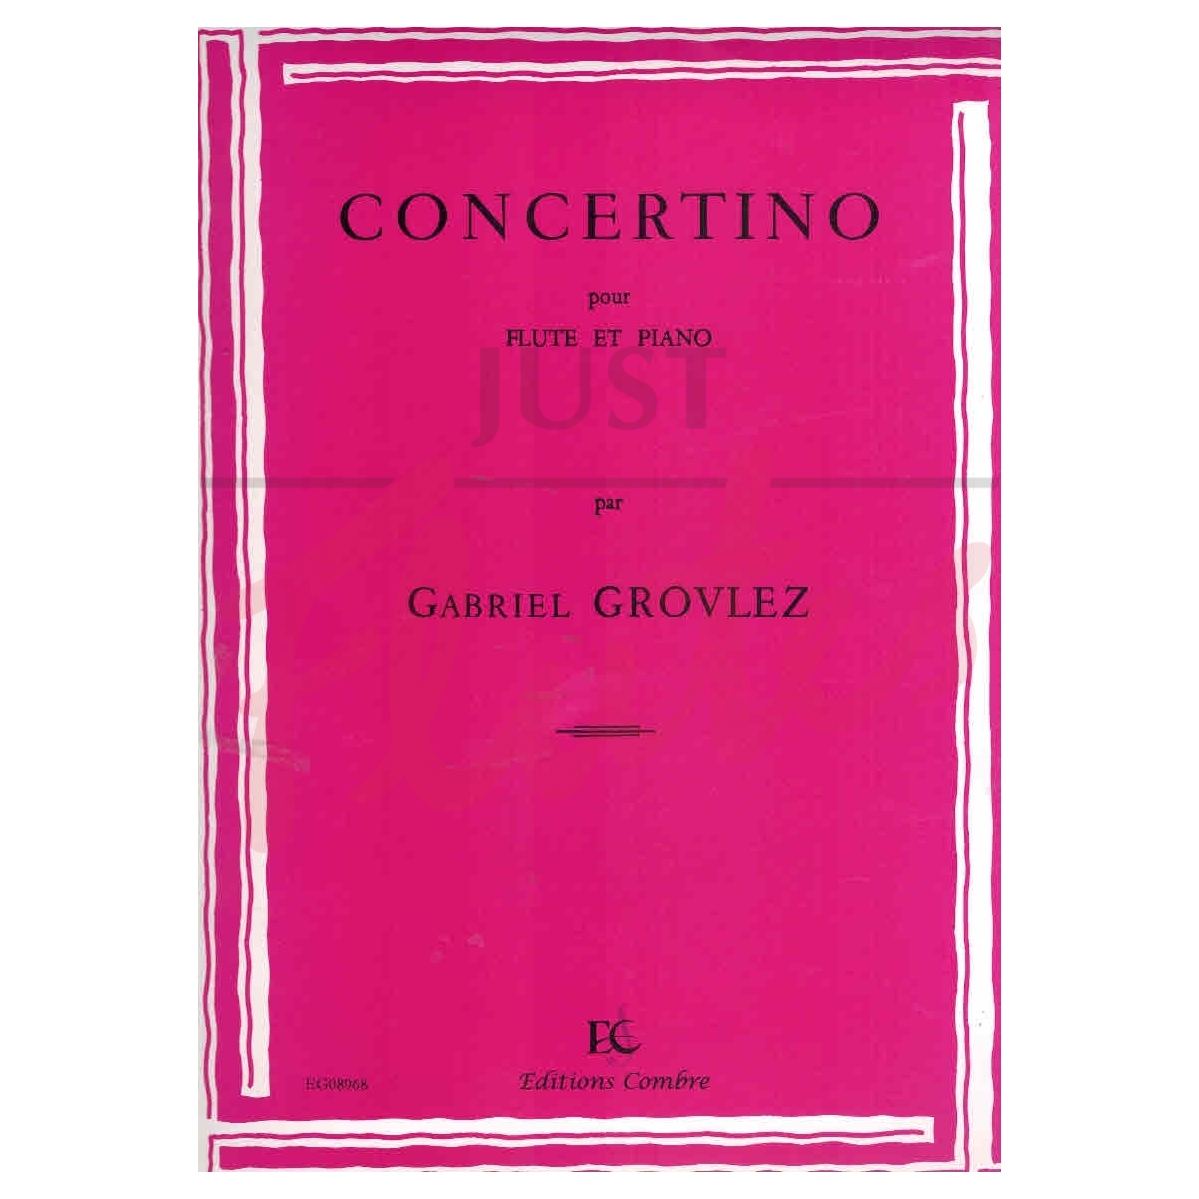 Concertino for Flute and Piano